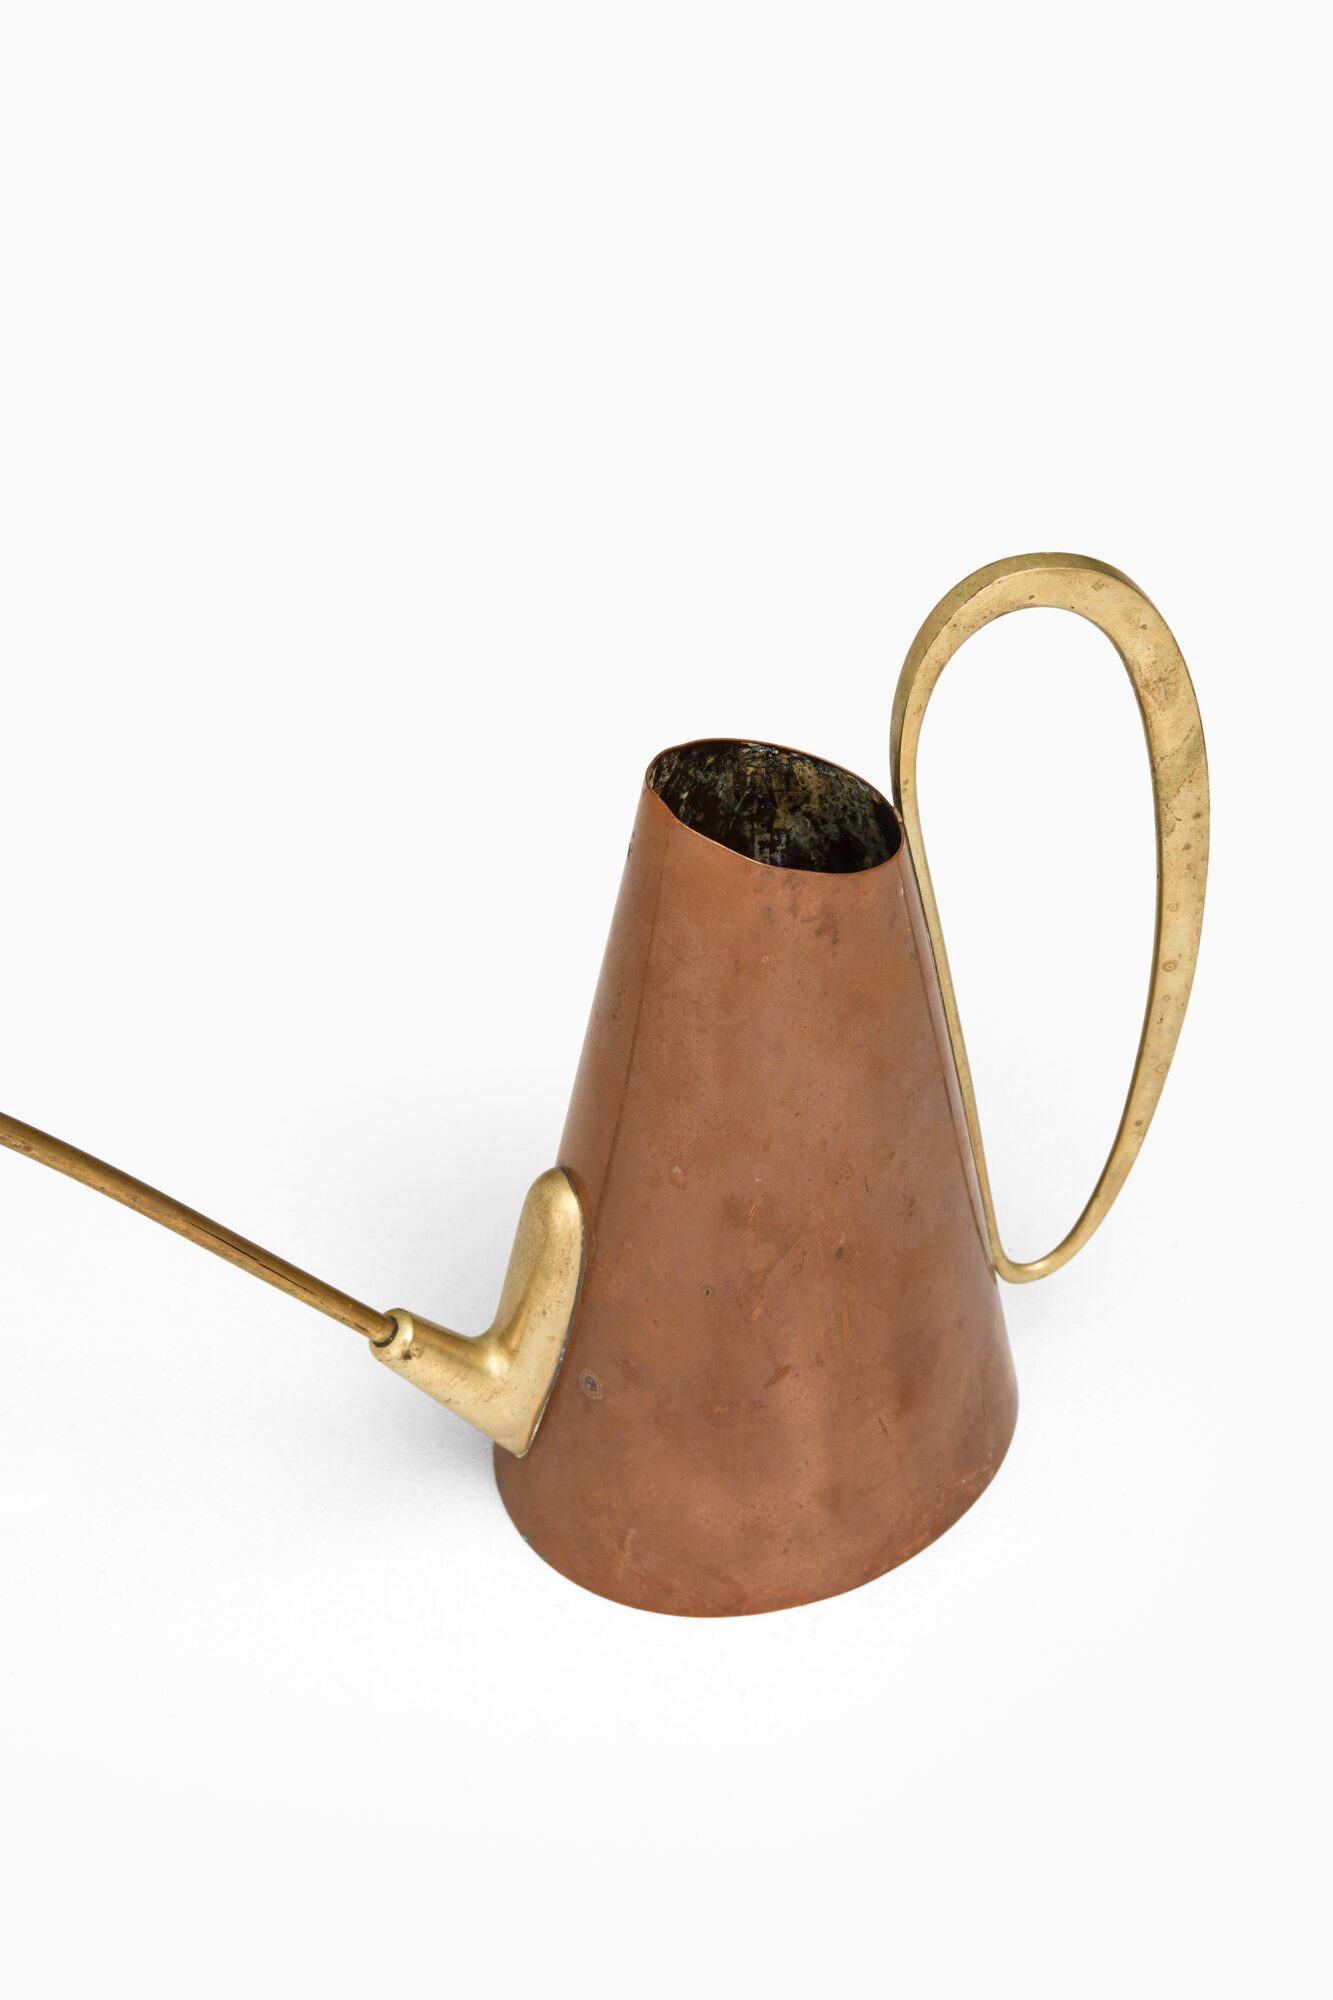 Carl Auböck watering can in brass at Studio Schalling